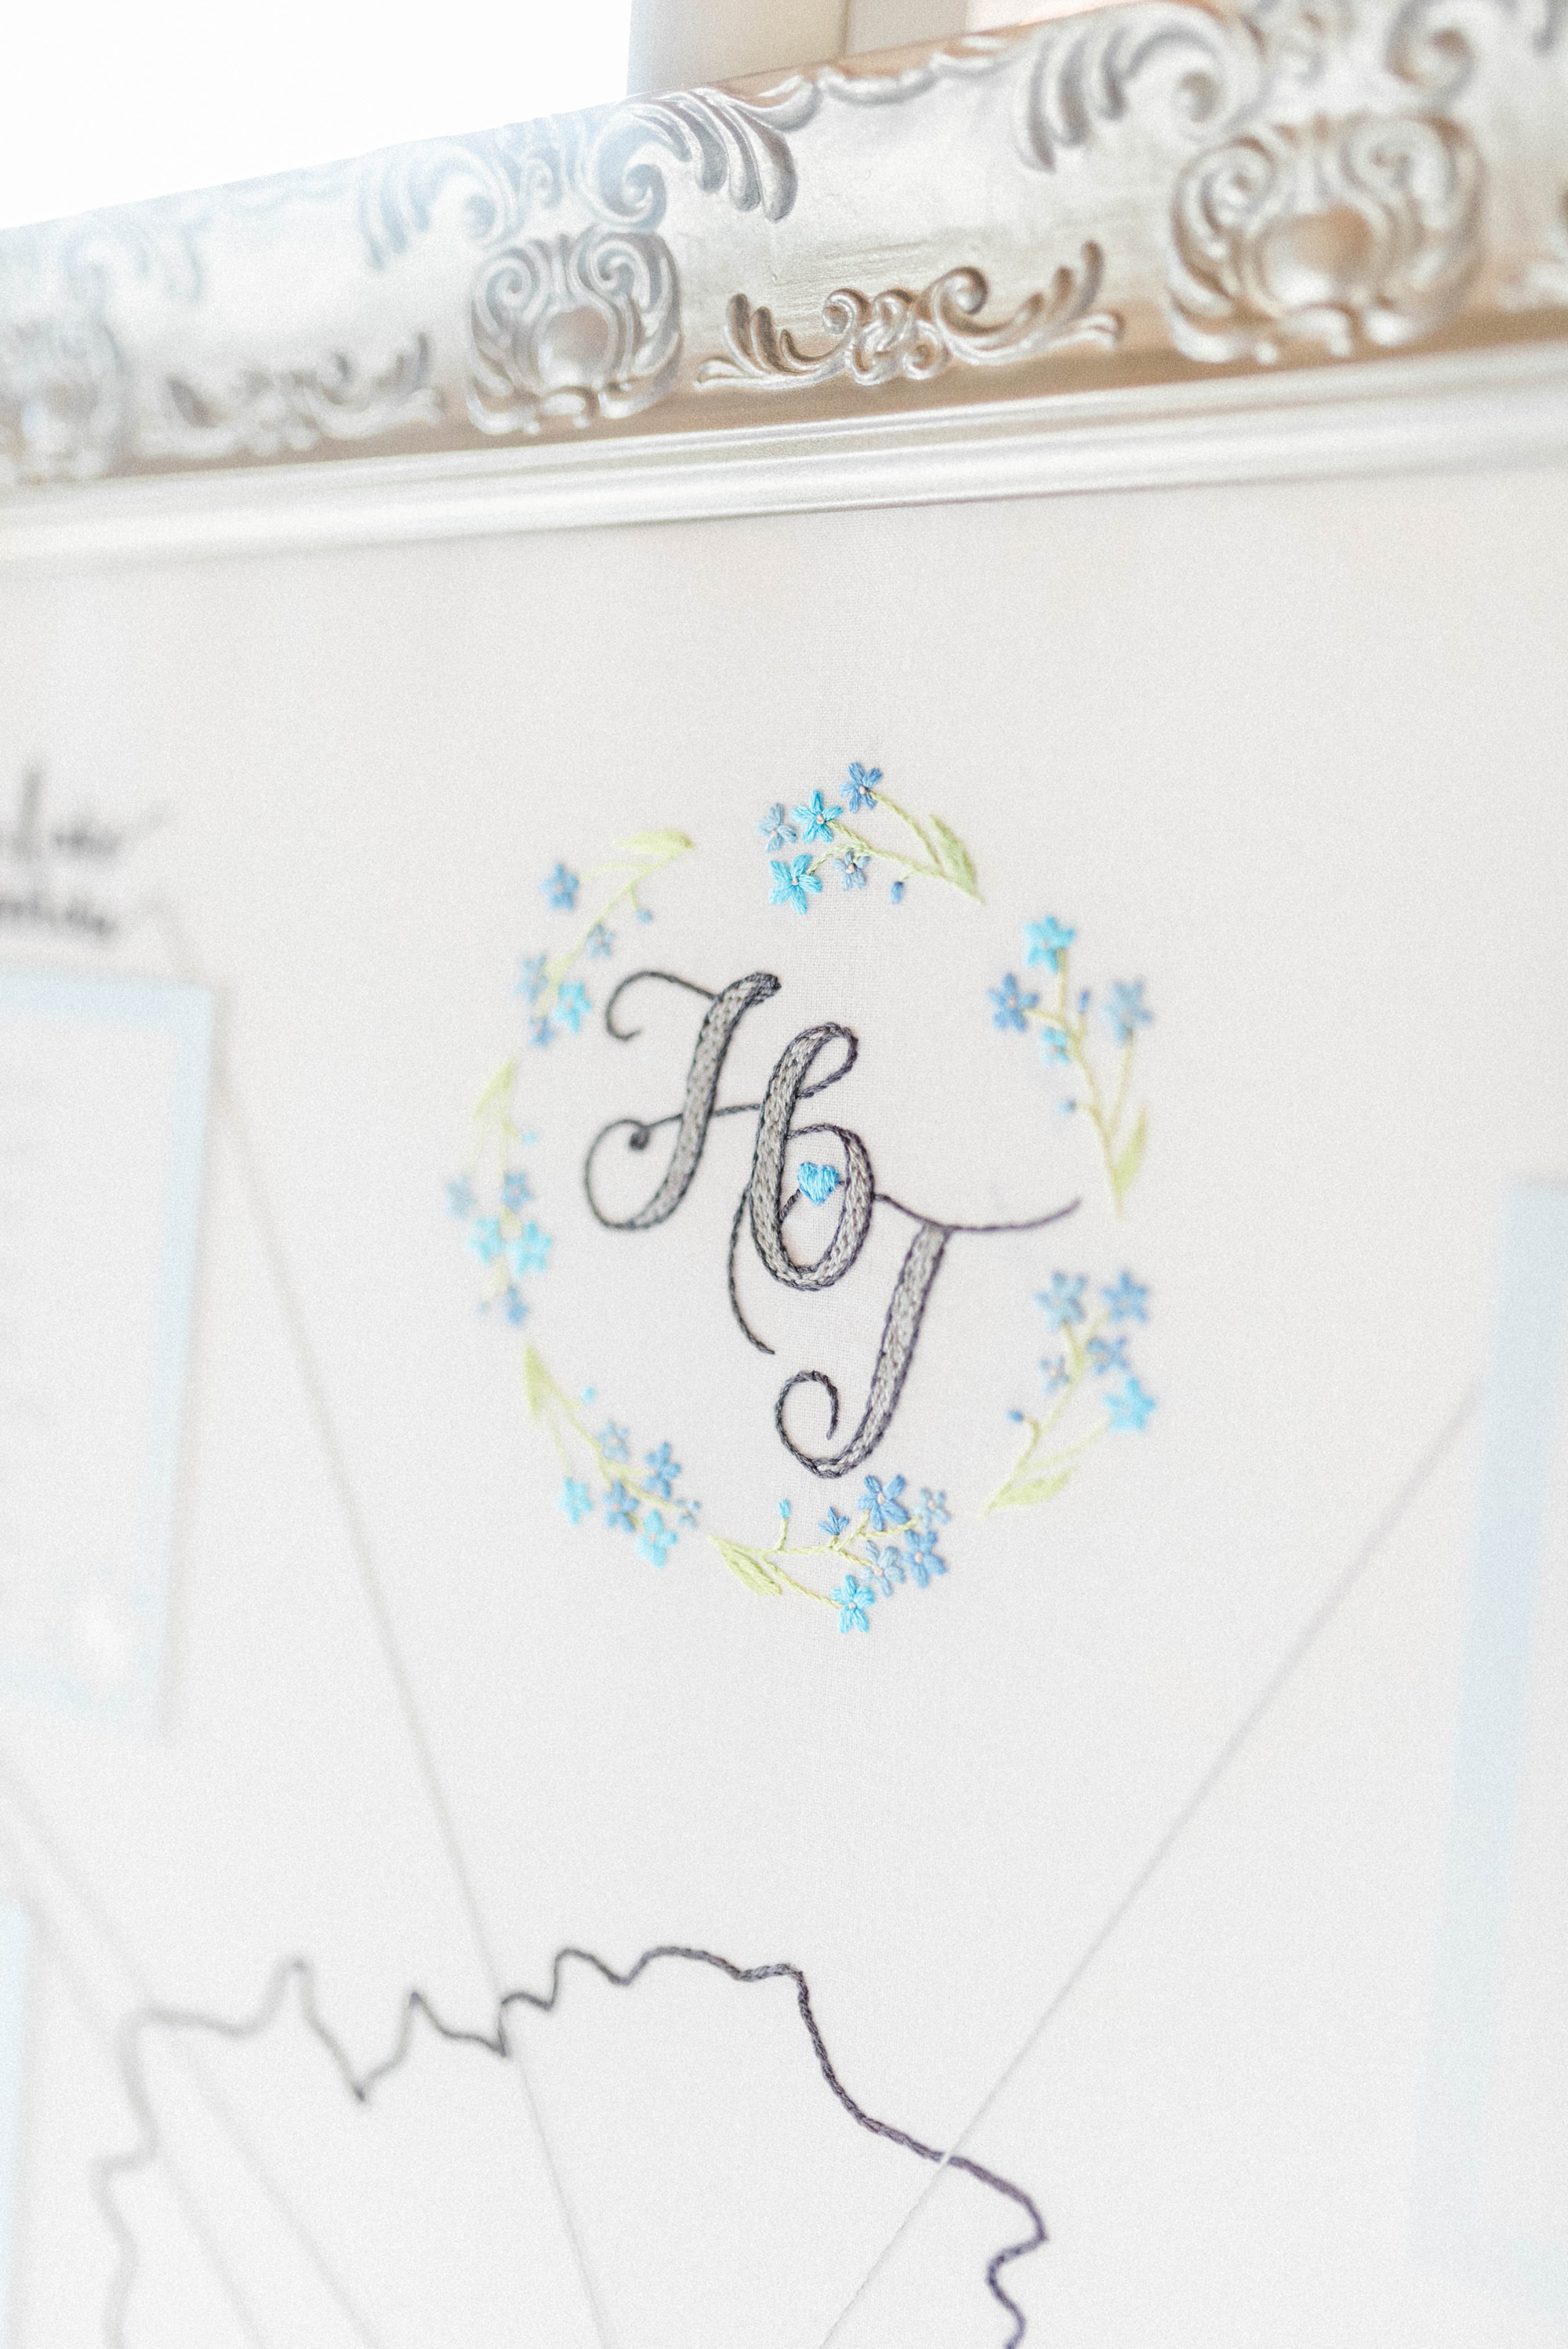 Embroidered table plan - A Pronovias Dress Embroidered with Forget-me-nots for an Italian Inspired, Flower-Filled Spring Wedding in Yorkshire